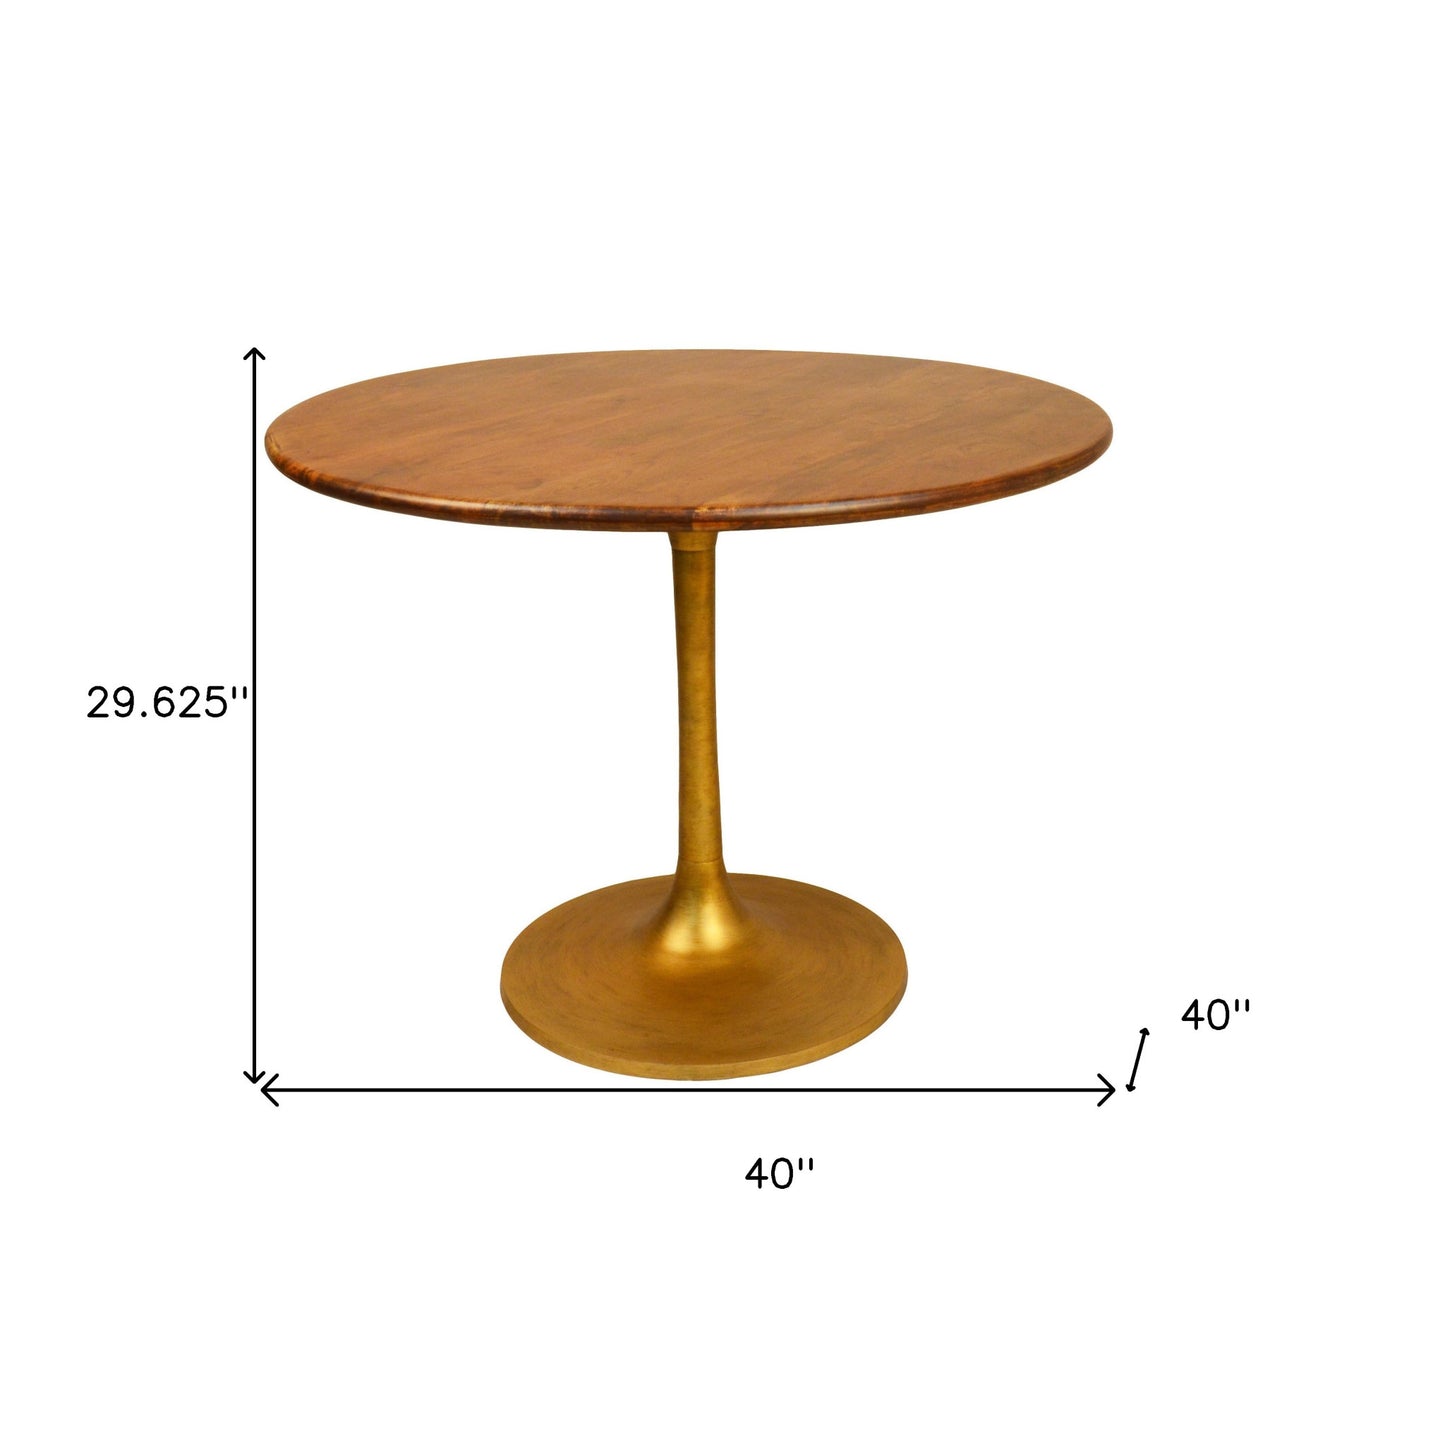 40" Brown and Gold Rounded Solid Wood and Iron Pedestal Base Dining Table